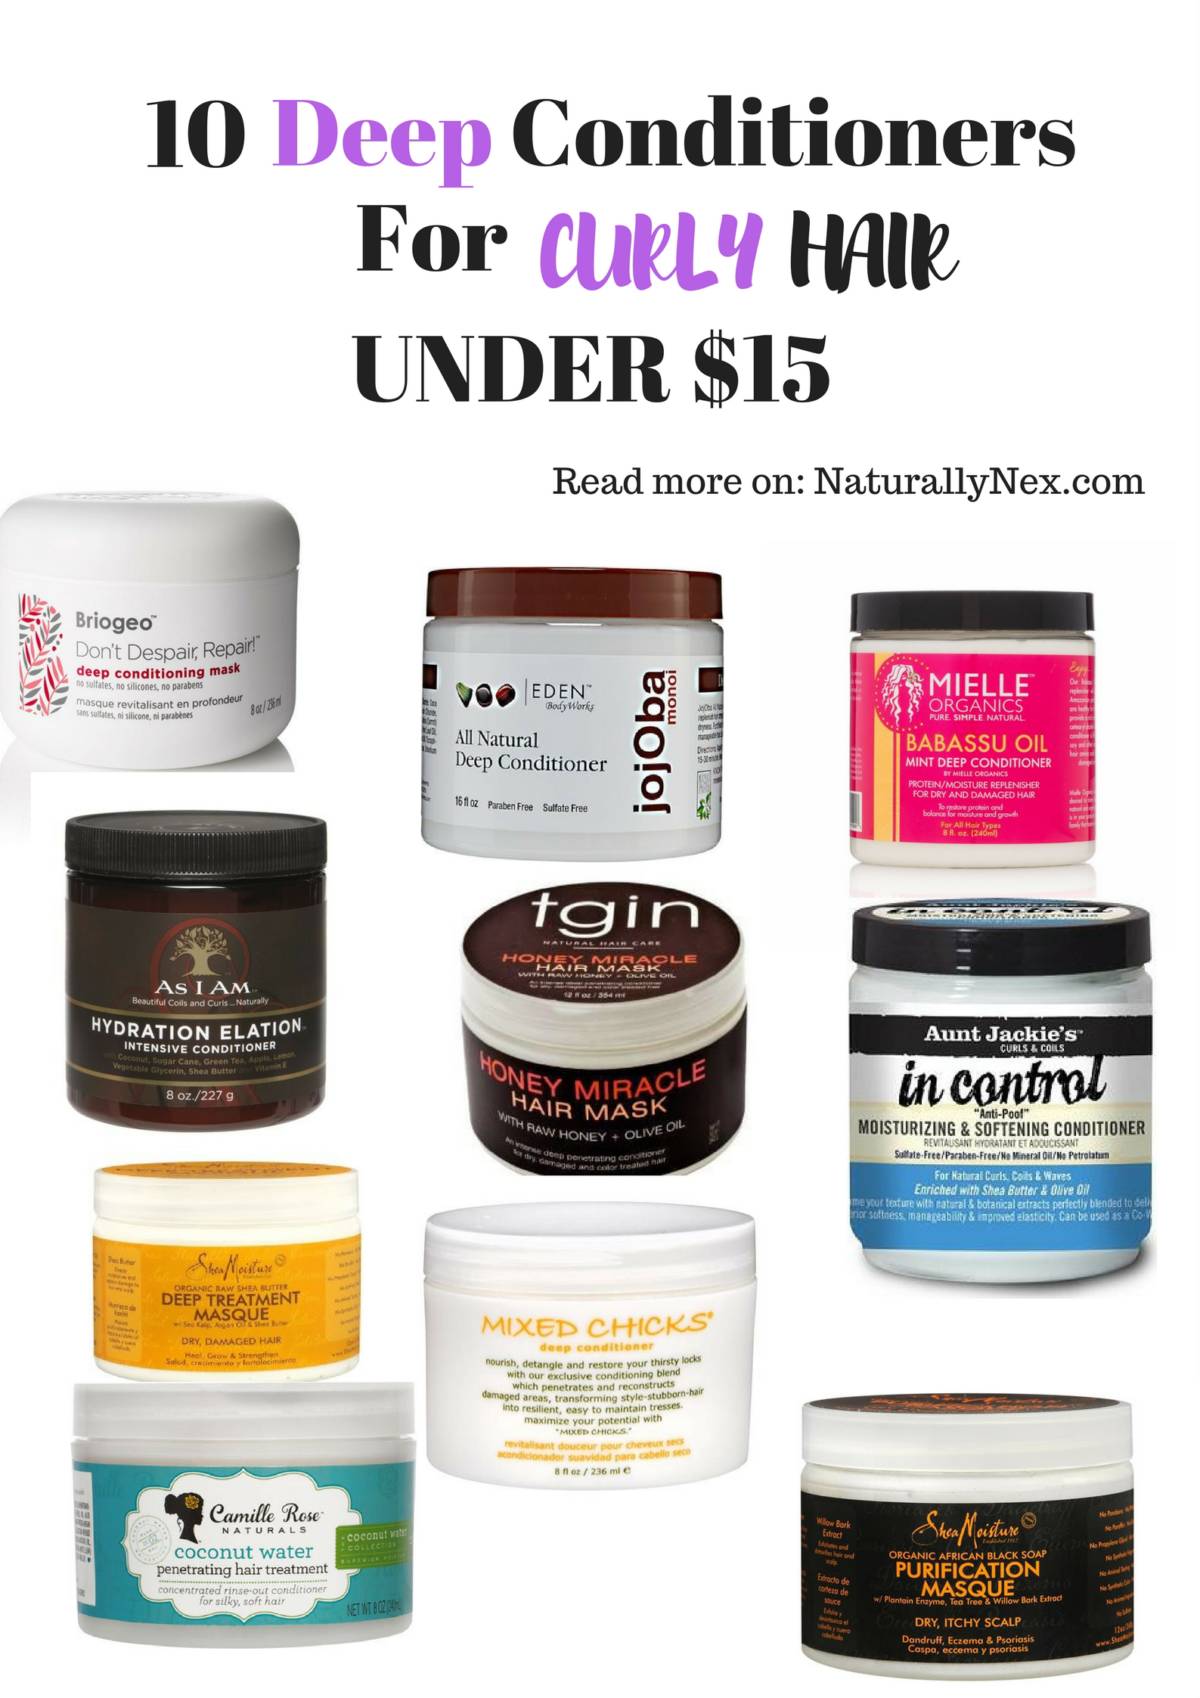 10 deep conditioners under $15 for Fall